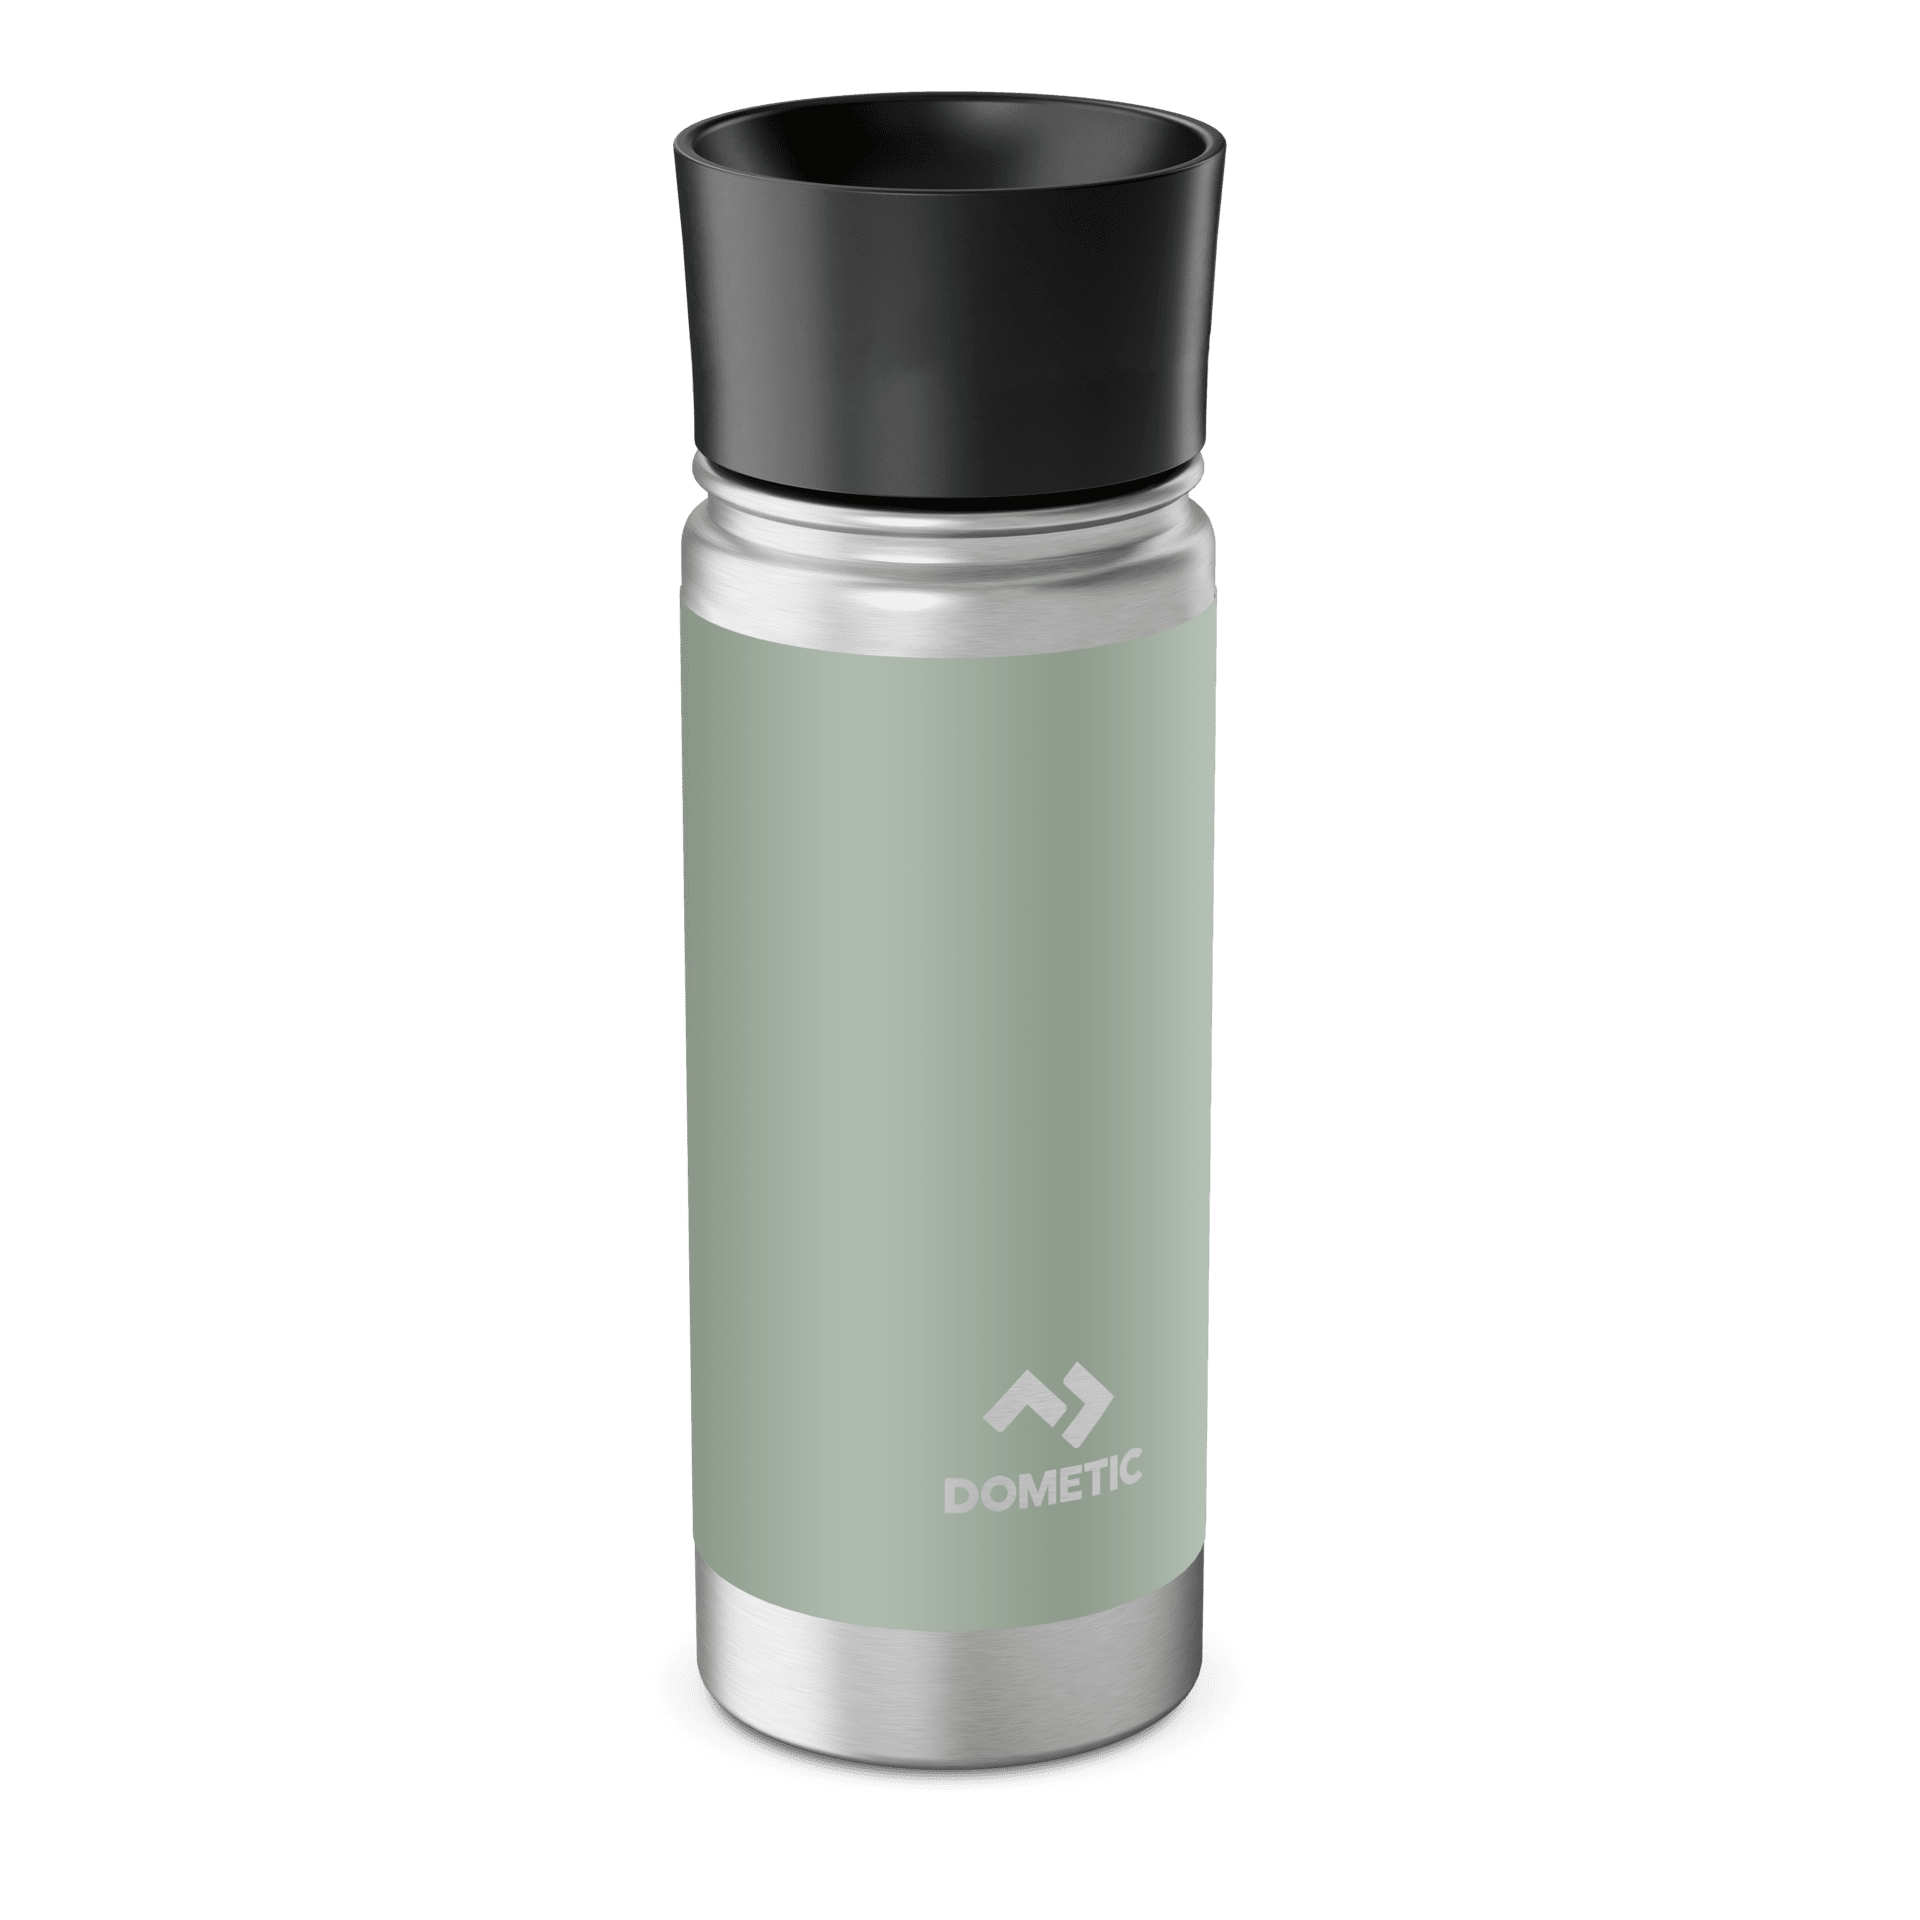 Dometic Thermo Bottle 50 | Dometic United States